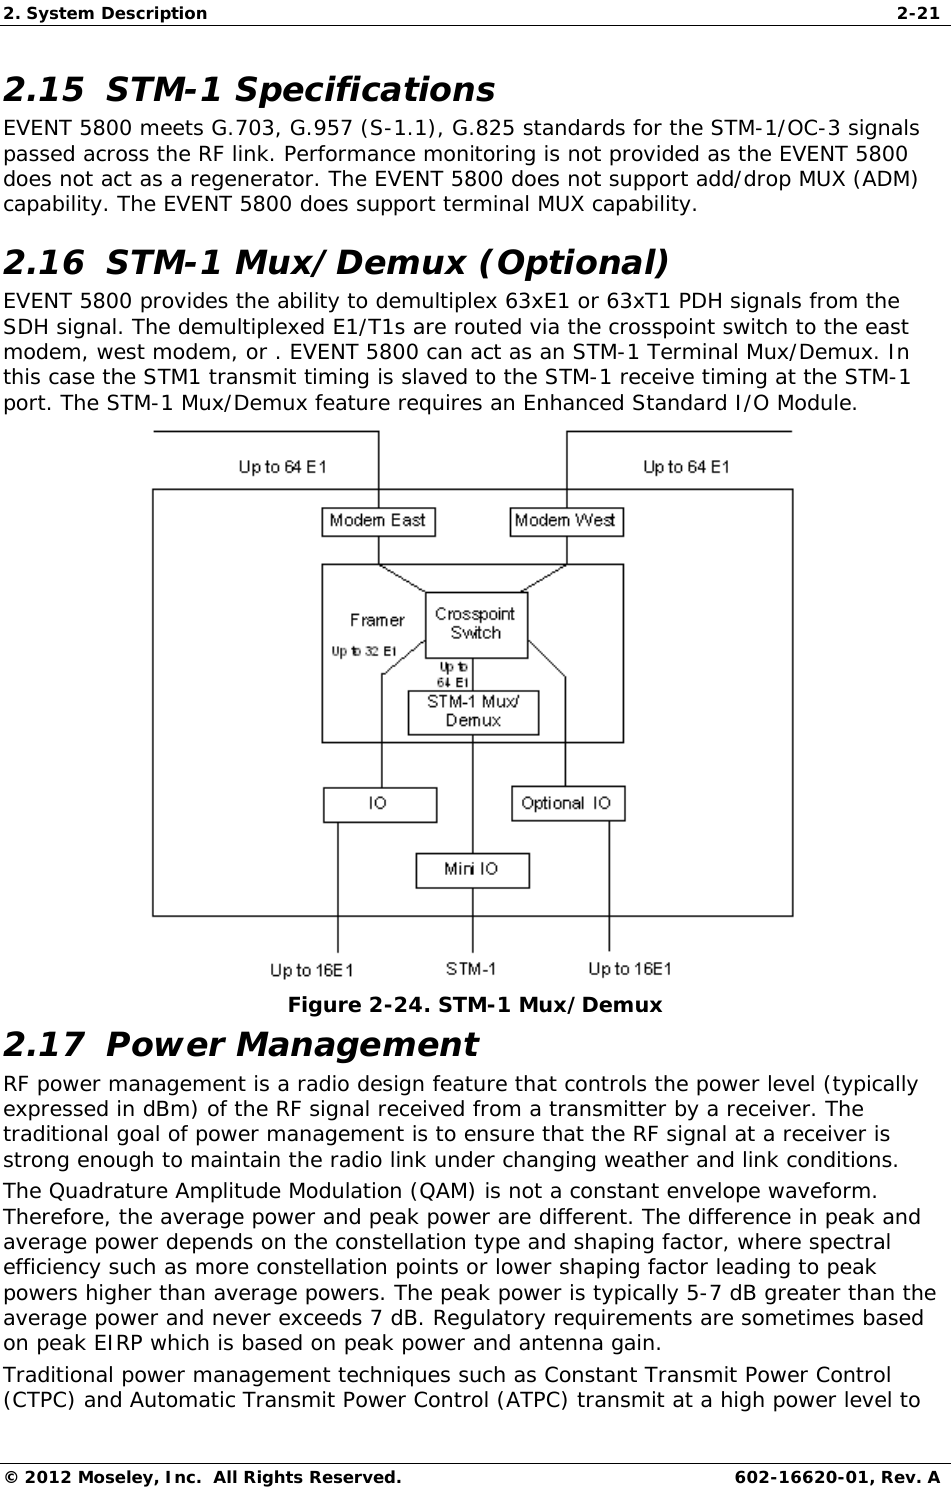 2. System Description  2-21 © 2012 Moseley, Inc.  All Rights Reserved.  602-16620-01, Rev. A 2.15  STM-1 Specifications  EVENT 5800 meets G.703, G.957 (S-1.1), G.825 standards for the STM-1/OC-3 signals passed across the RF link. Performance monitoring is not provided as the EVENT 5800 does not act as a regenerator. The EVENT 5800 does not support add/drop MUX (ADM) capability. The EVENT 5800 does support terminal MUX capability.  2.16  STM-1 Mux/Demux (Optional)  EVENT 5800 provides the ability to demultiplex 63xE1 or 63xT1 PDH signals from the SDH signal. The demultiplexed E1/T1s are routed via the crosspoint switch to the east modem, west modem, or . EVENT 5800 can act as an STM-1 Terminal Mux/Demux. In this case the STM1 transmit timing is slaved to the STM-1 receive timing at the STM-1 port. The STM-1 Mux/Demux feature requires an Enhanced Standard I/O Module.  Figure 2-24. STM-1 Mux/Demux 2.17  Power Management RF power management is a radio design feature that controls the power level (typically expressed in dBm) of the RF signal received from a transmitter by a receiver. The traditional goal of power management is to ensure that the RF signal at a receiver is strong enough to maintain the radio link under changing weather and link conditions. The Quadrature Amplitude Modulation (QAM) is not a constant envelope waveform. Therefore, the average power and peak power are different. The difference in peak and average power depends on the constellation type and shaping factor, where spectral efficiency such as more constellation points or lower shaping factor leading to peak powers higher than average powers. The peak power is typically 5-7 dB greater than the average power and never exceeds 7 dB. Regulatory requirements are sometimes based on peak EIRP which is based on peak power and antenna gain. Traditional power management techniques such as Constant Transmit Power Control (CTPC) and Automatic Transmit Power Control (ATPC) transmit at a high power level to 